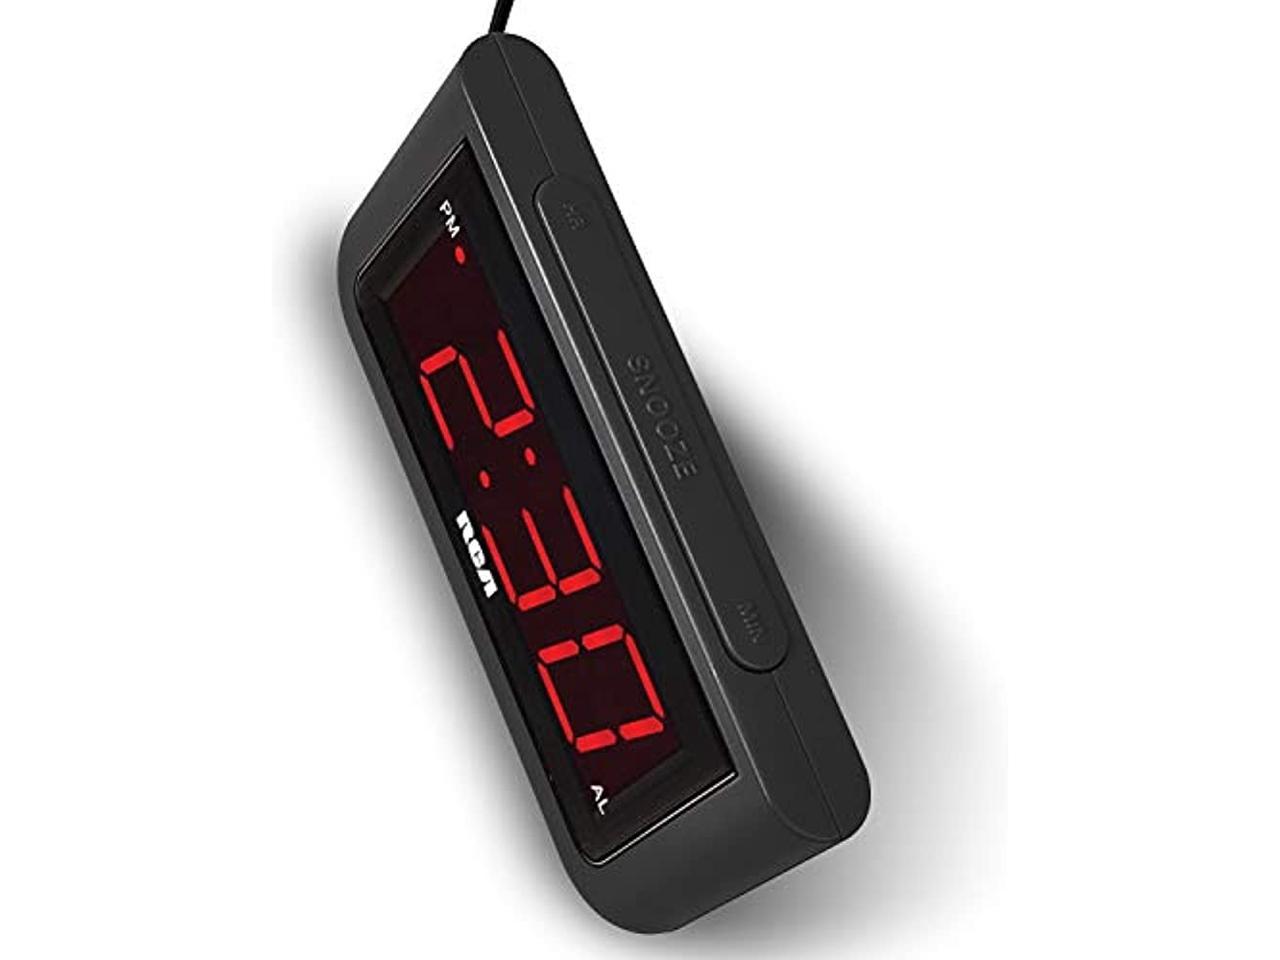 Details about   RCA RCD30 Alarm Clock with Black LED Display 